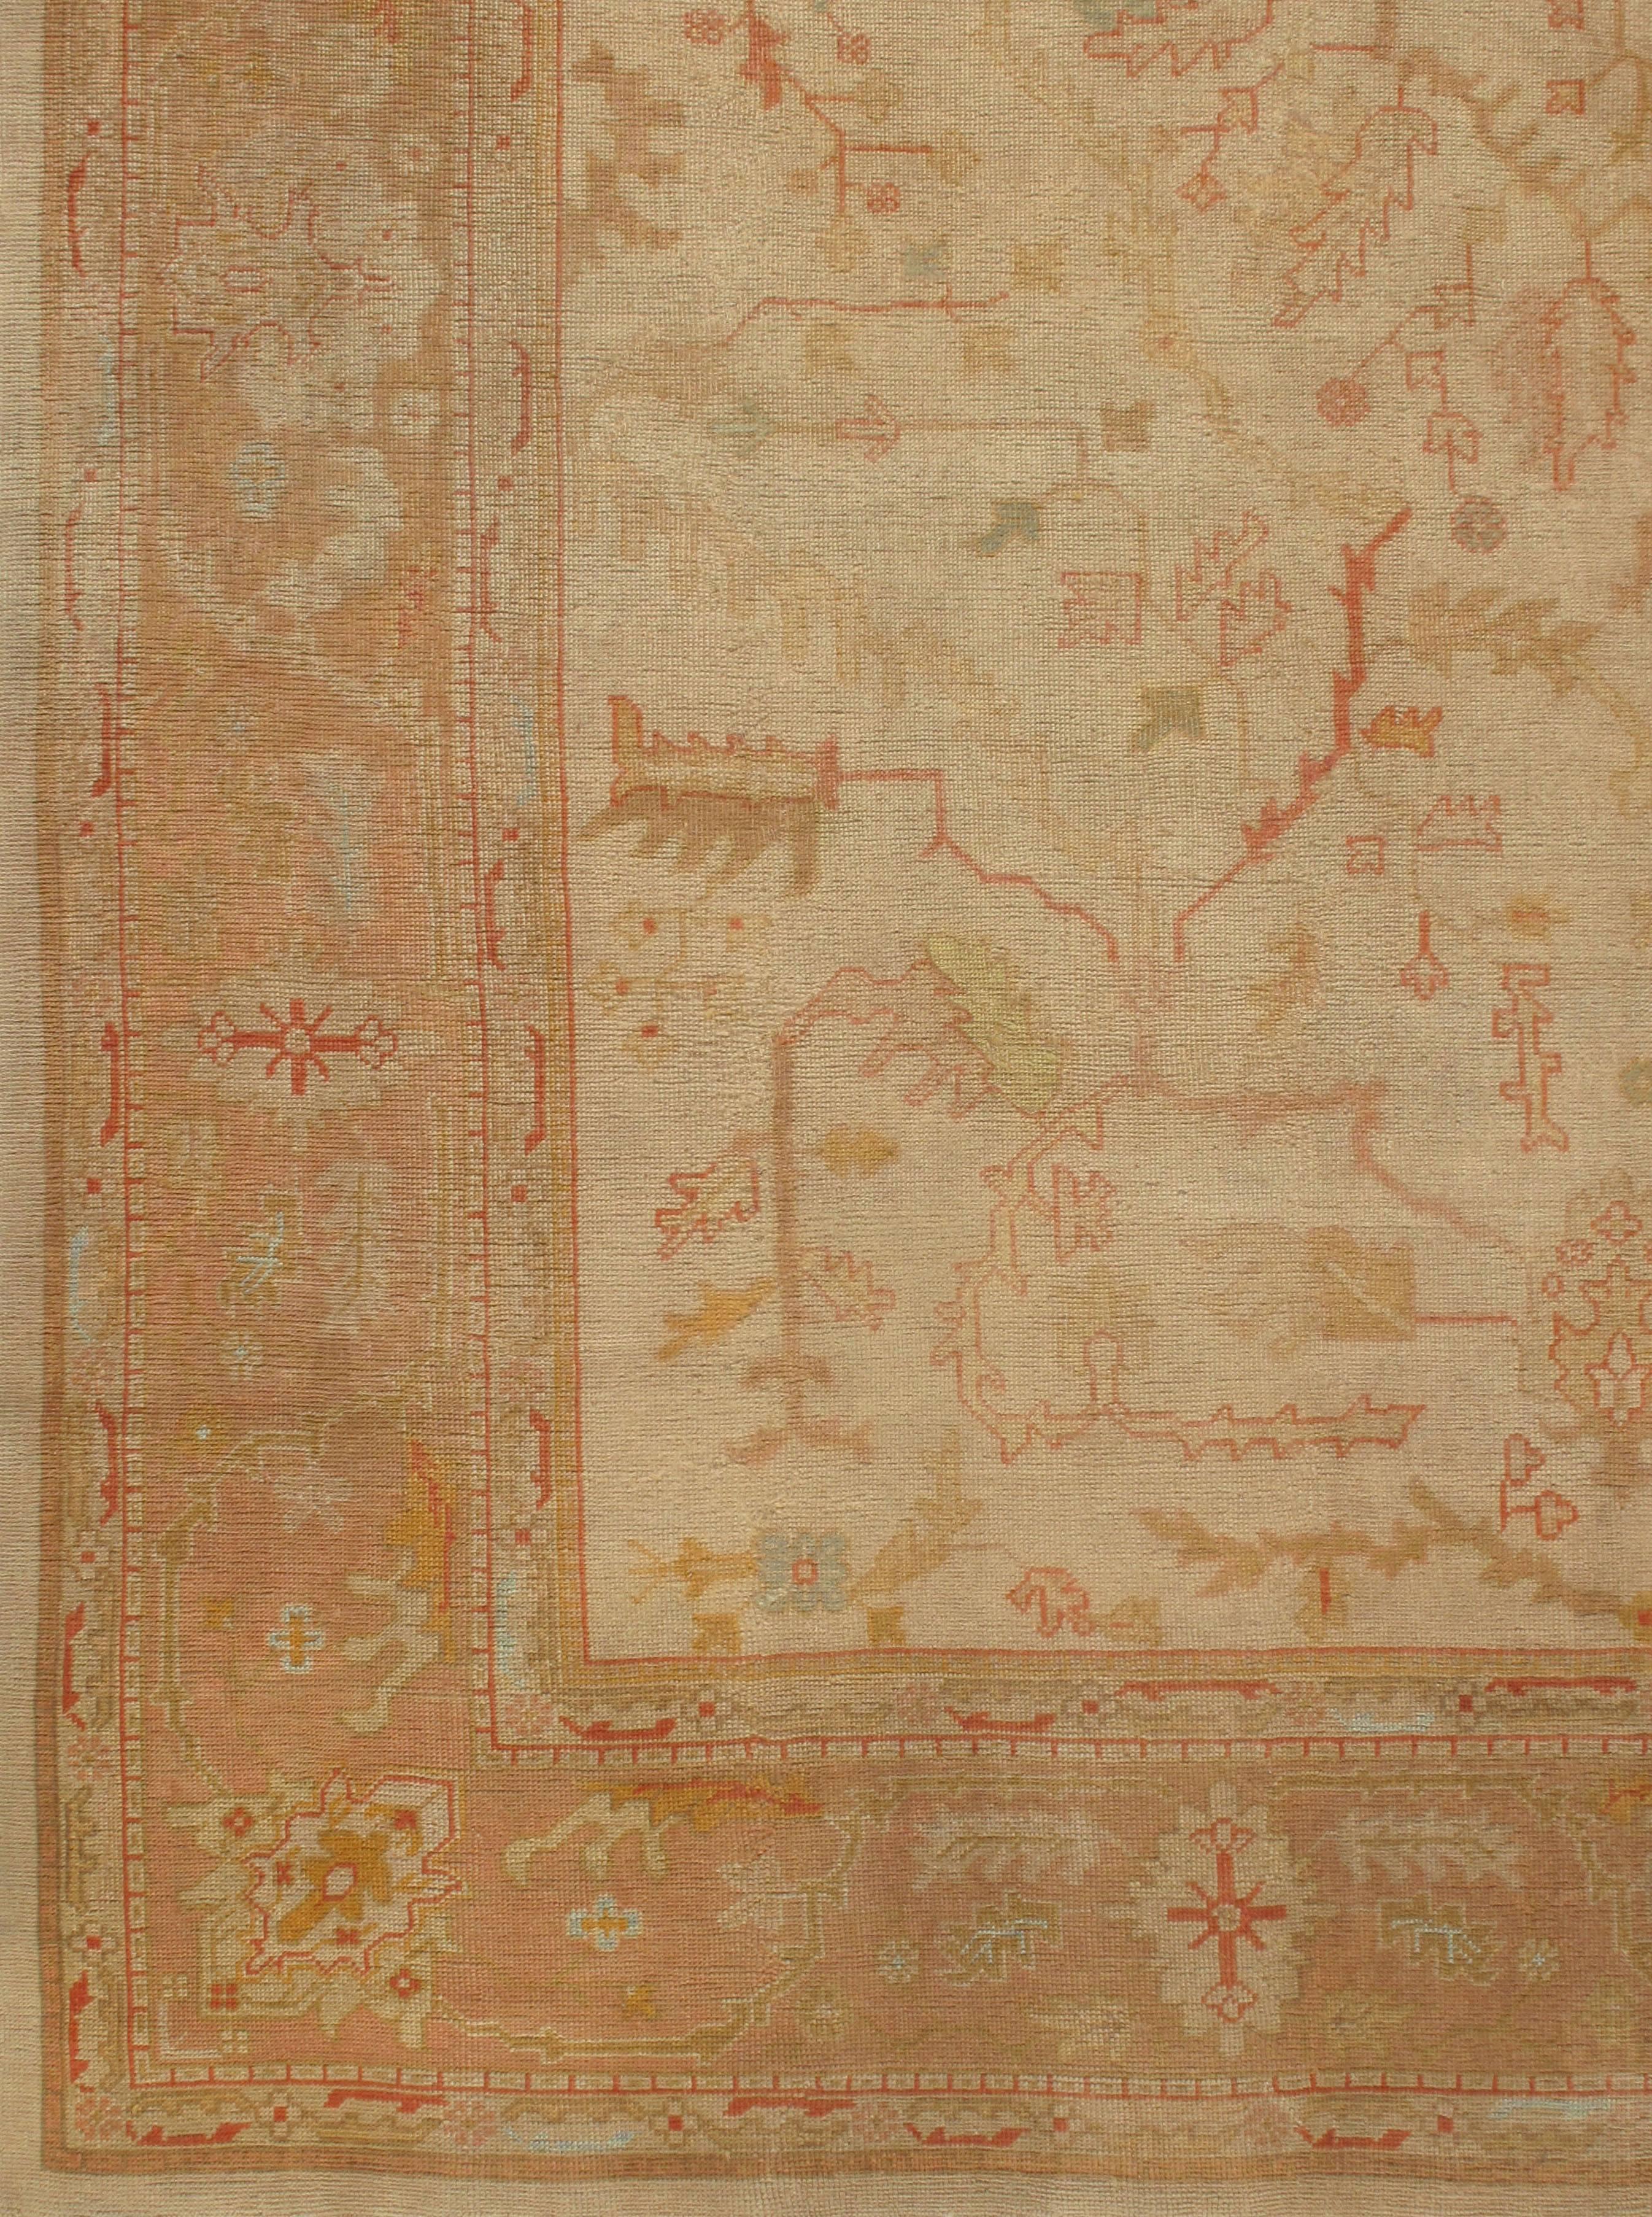 Antique Turkish Oushak rug, circa 1890, 11'6 x 14'6. Antique Oushaks are known for their soft palettes combined with eccentric drawing. The relatively coarse weaves, here on a wool foundation, mean vinery and branches are bent and broken rather than